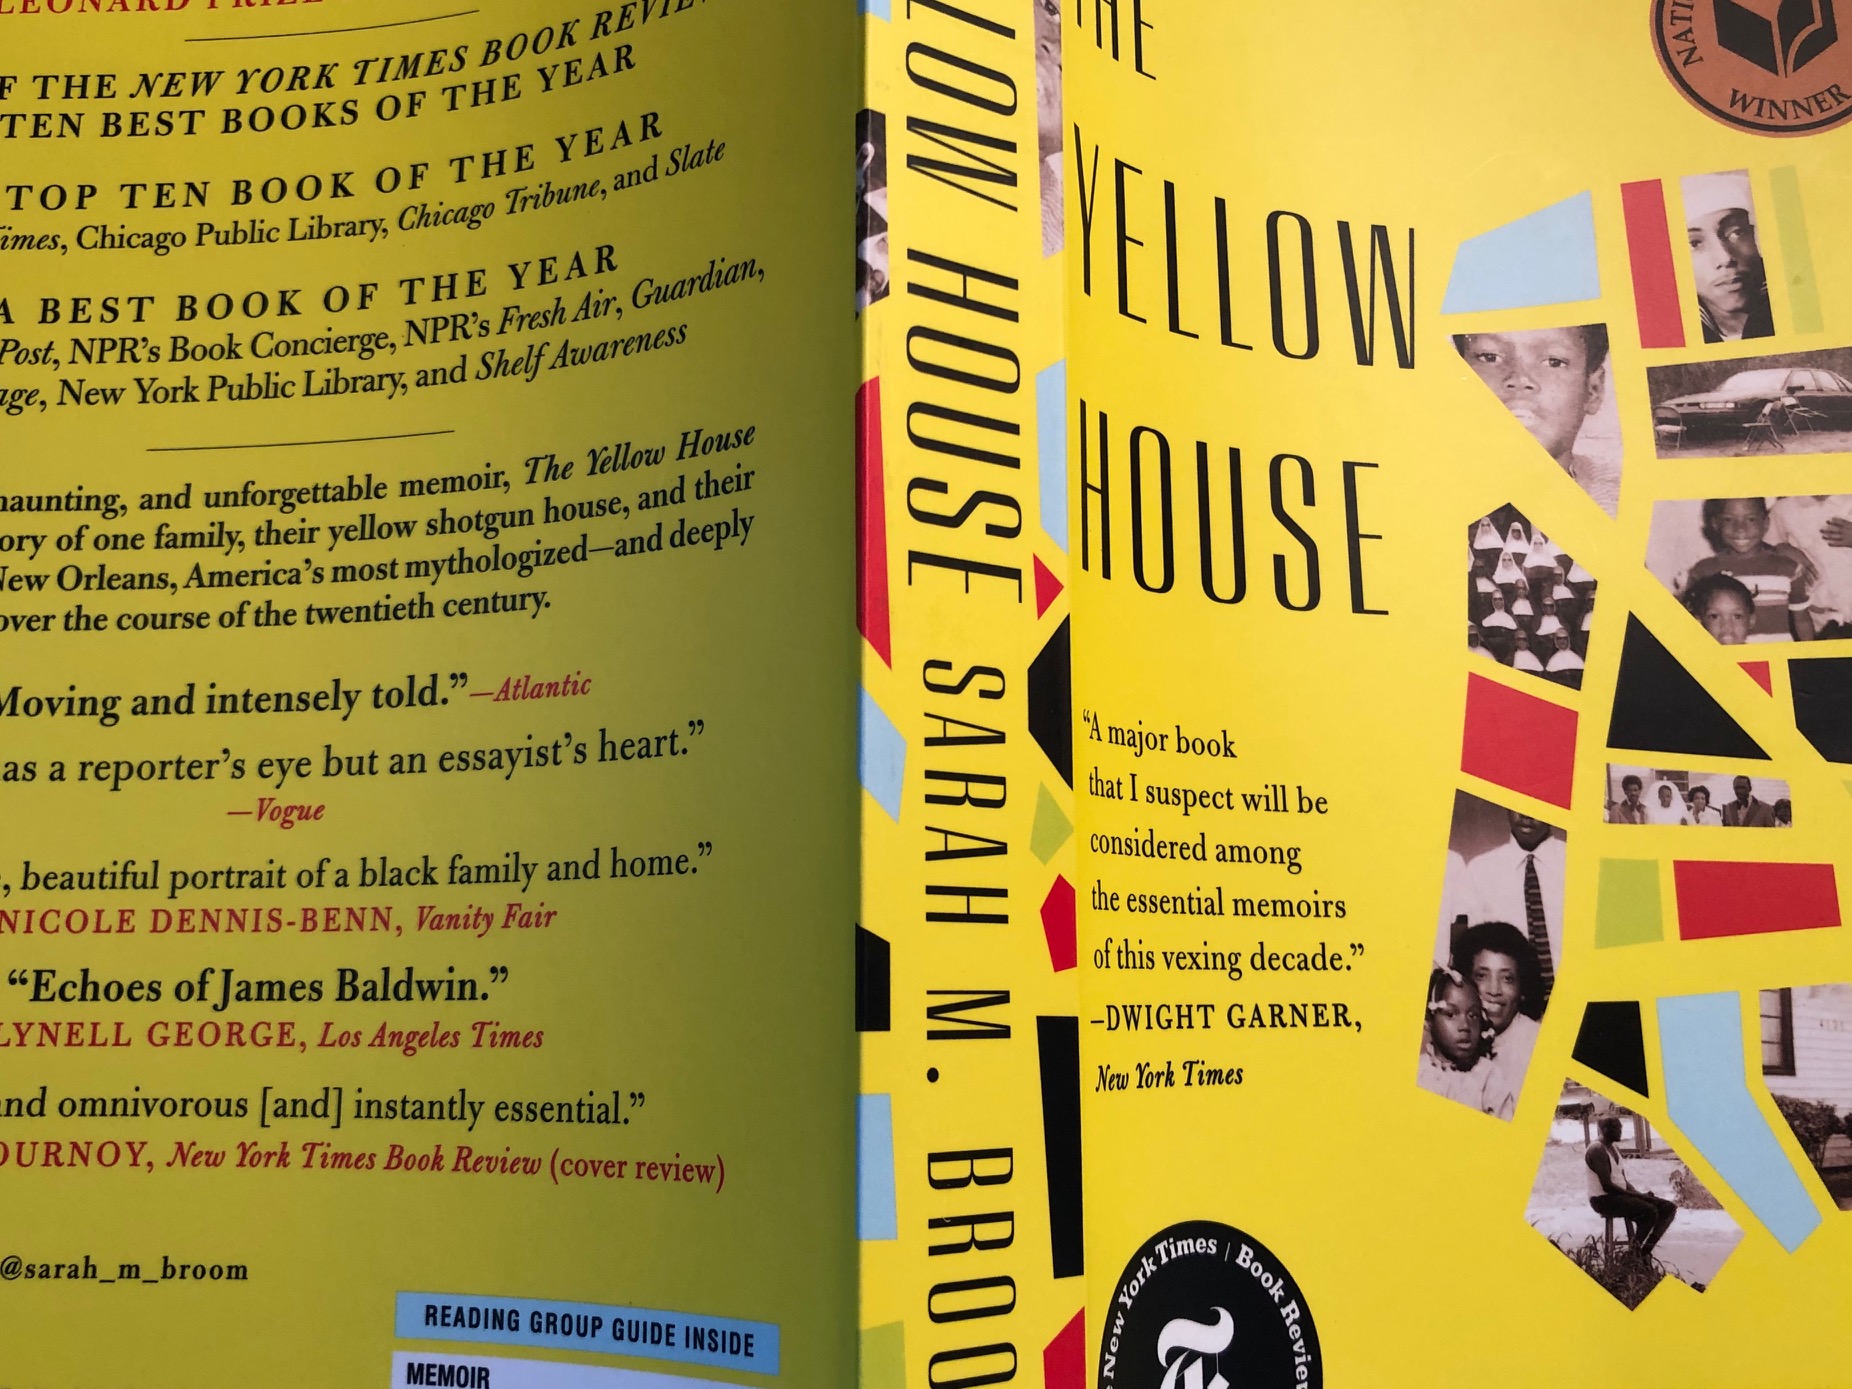 The Yellow House by Sarah Broom